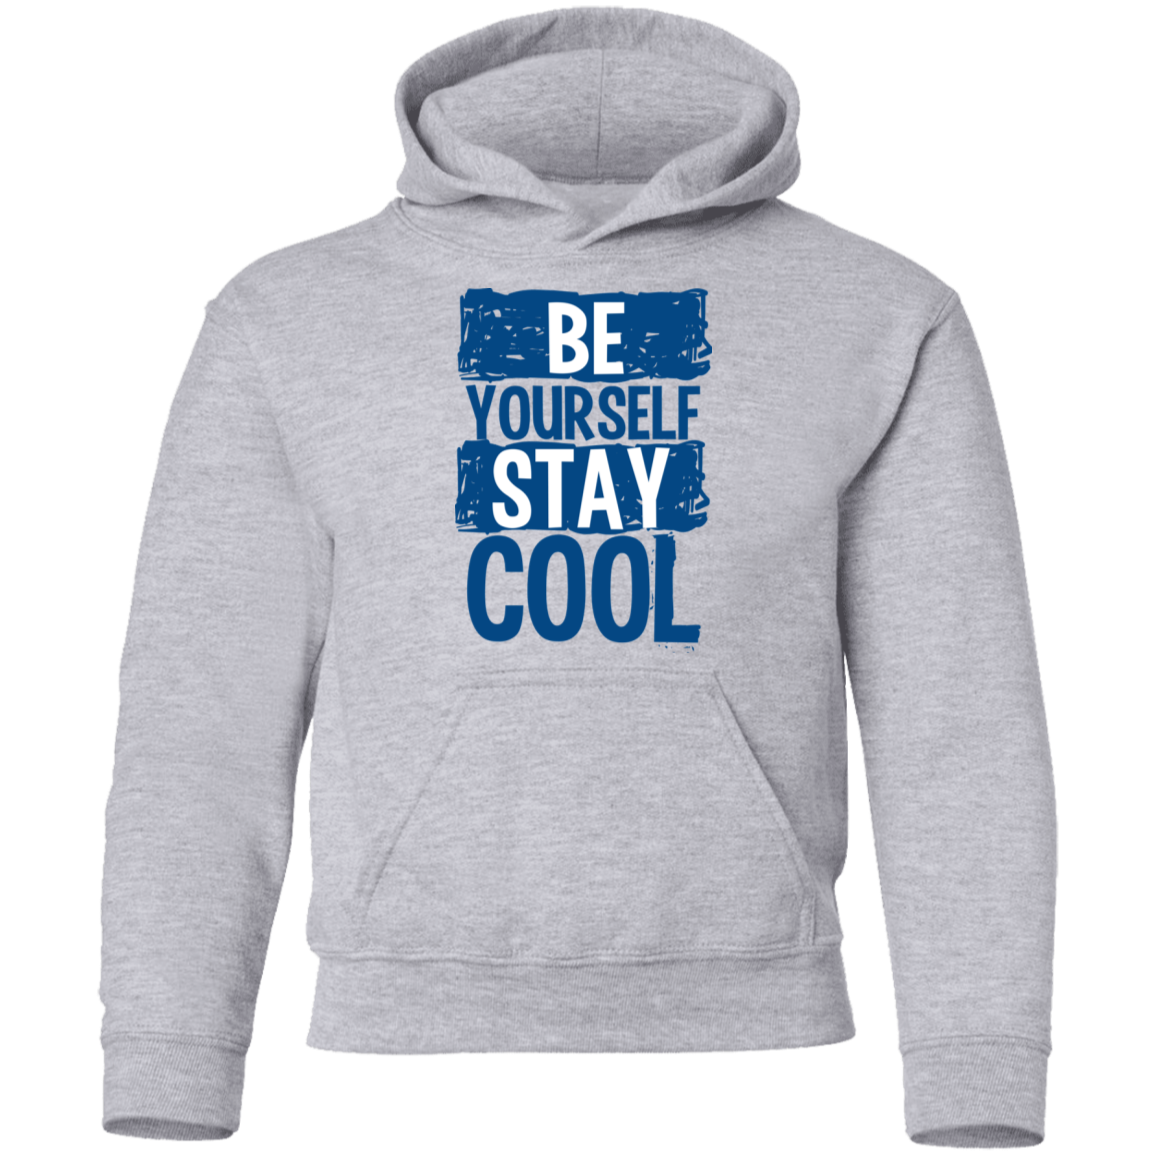 Be Yourself Stay Cool Kids Hoodie